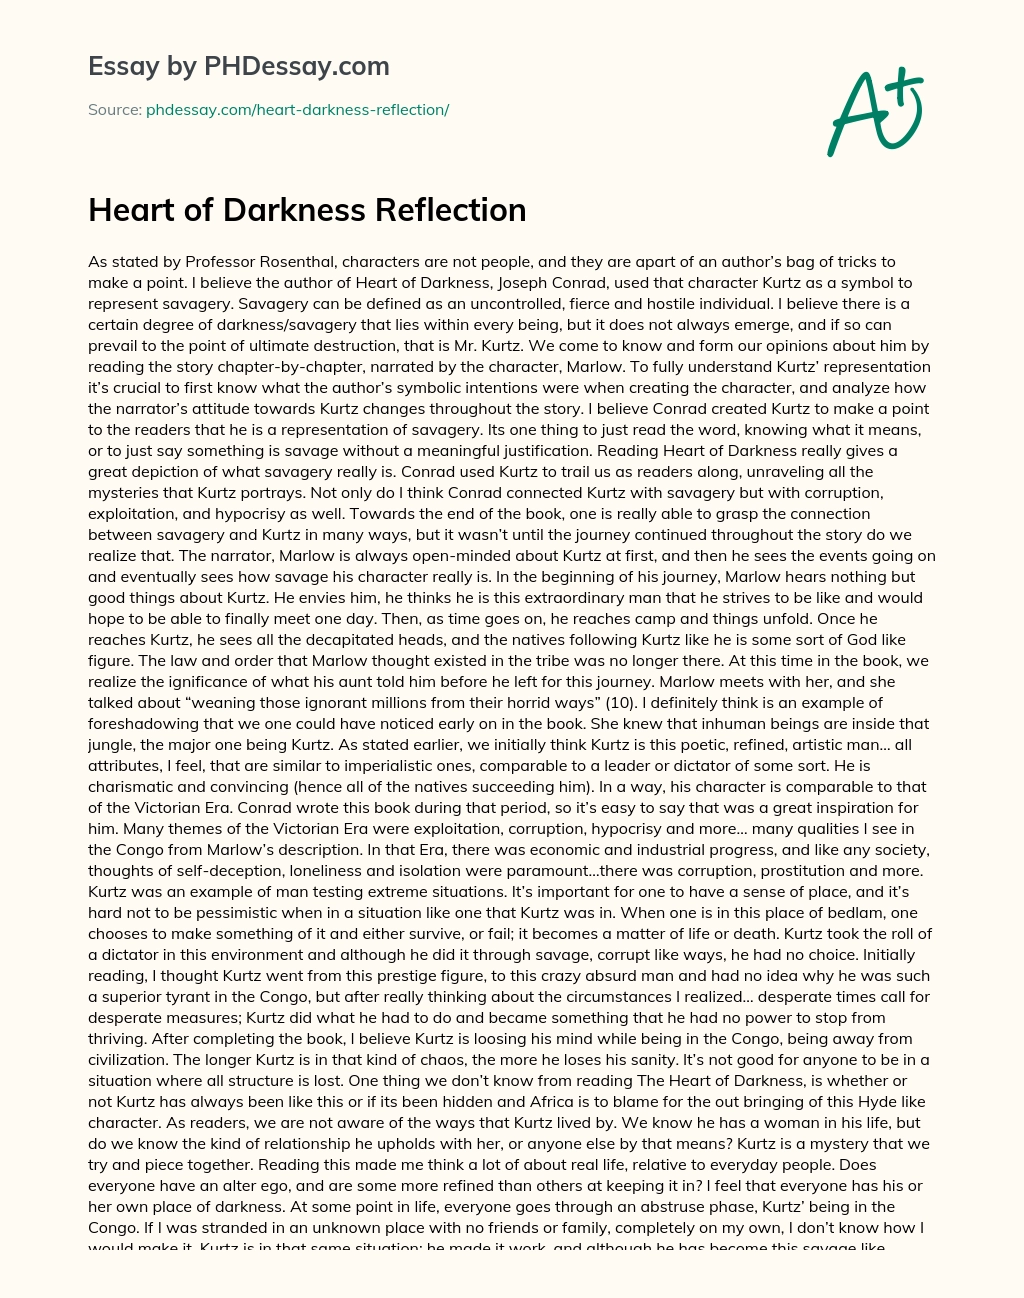 Heart of Darkness Reflection essay